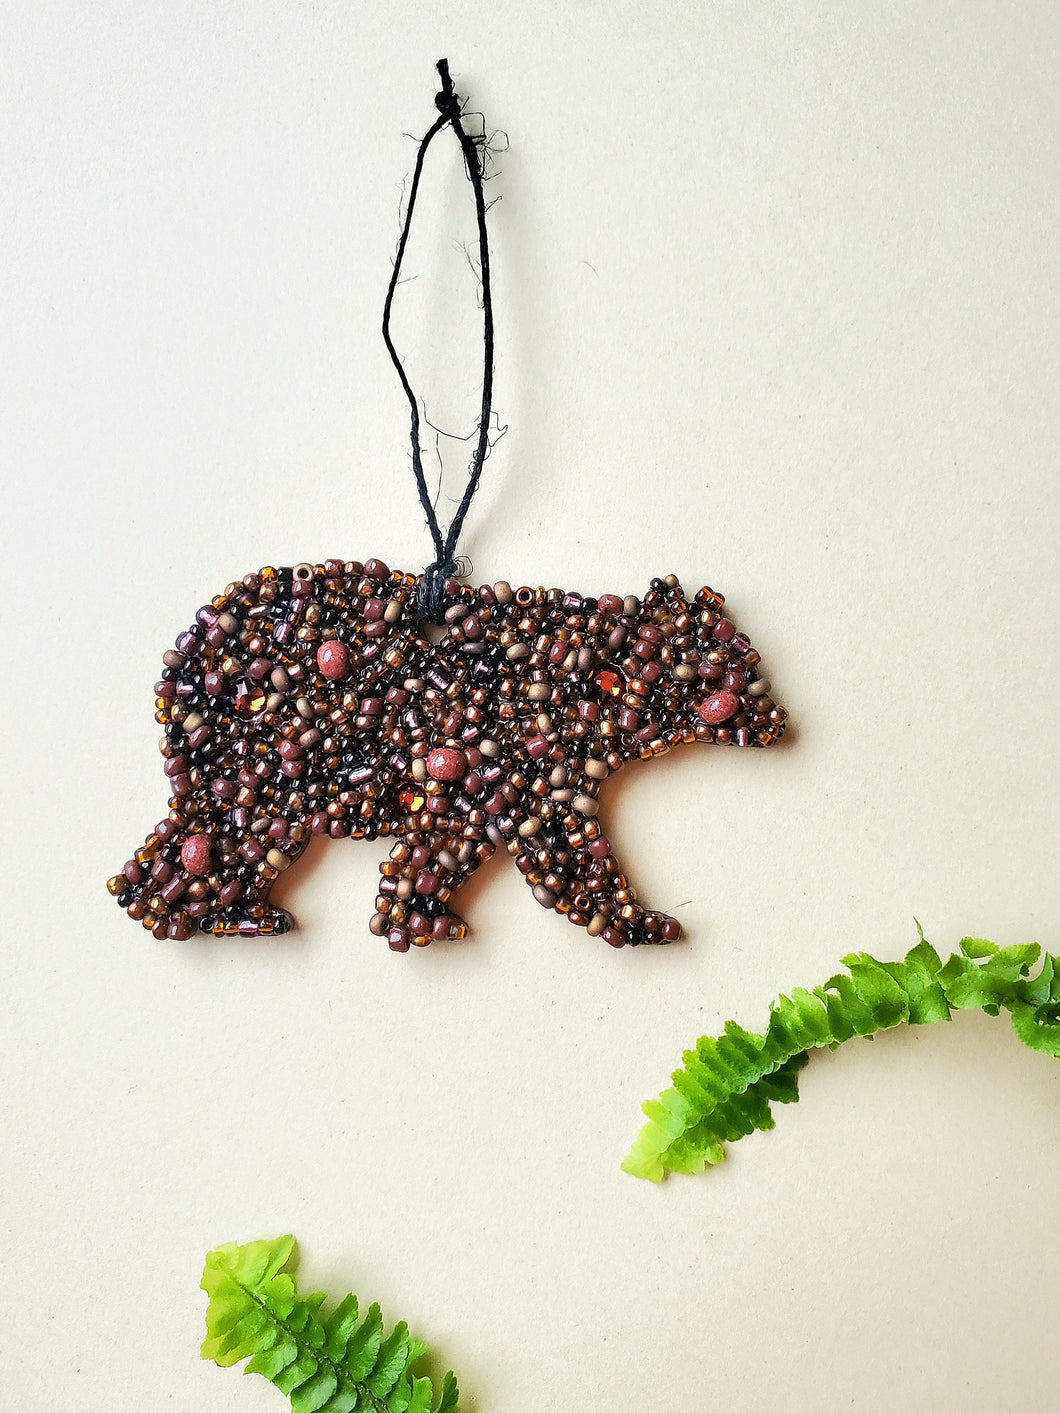 Beaded Bear Ornament, Gifts For Him, Unique Christmas gifts, Stocking Stuffers For Him, Nature Lover Decor, Gift for Camper, Small Ornaments